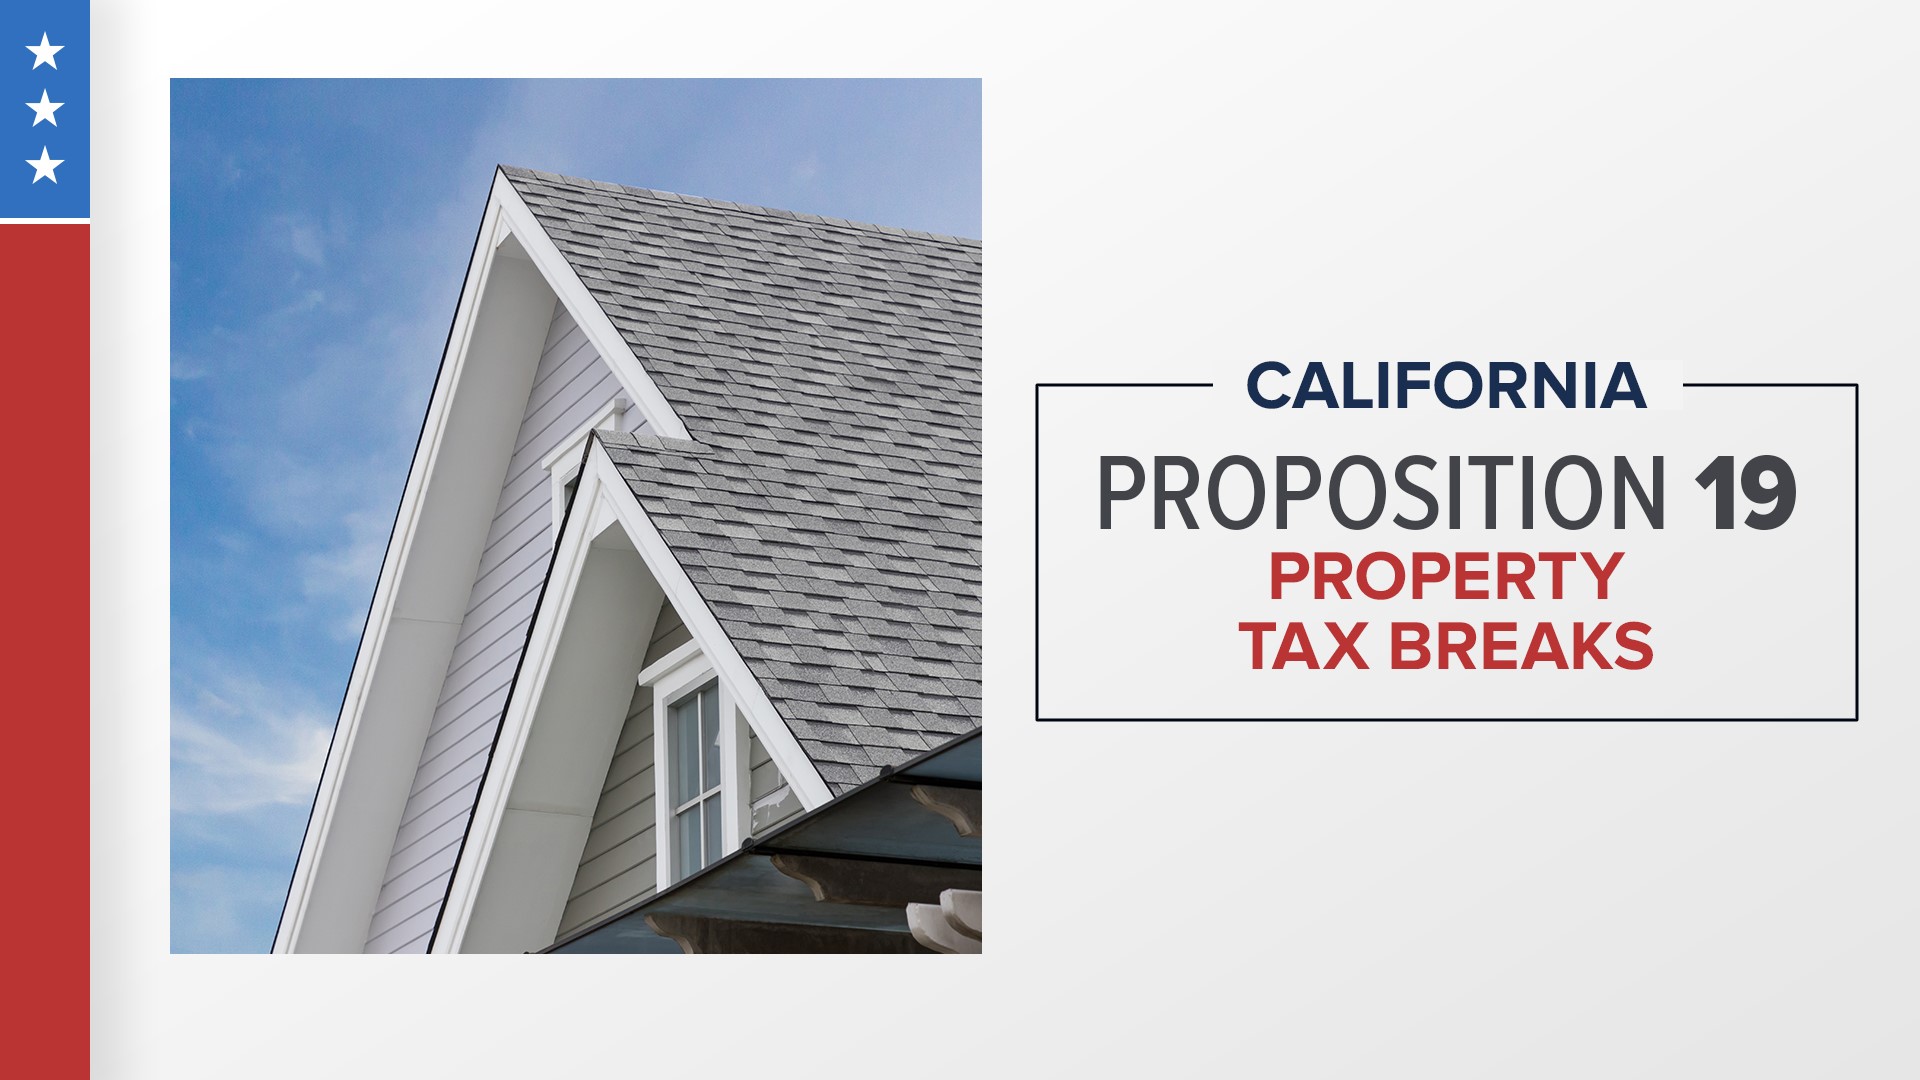 Proposition 19 includes two elements related to taxes tied to the transfer of property.